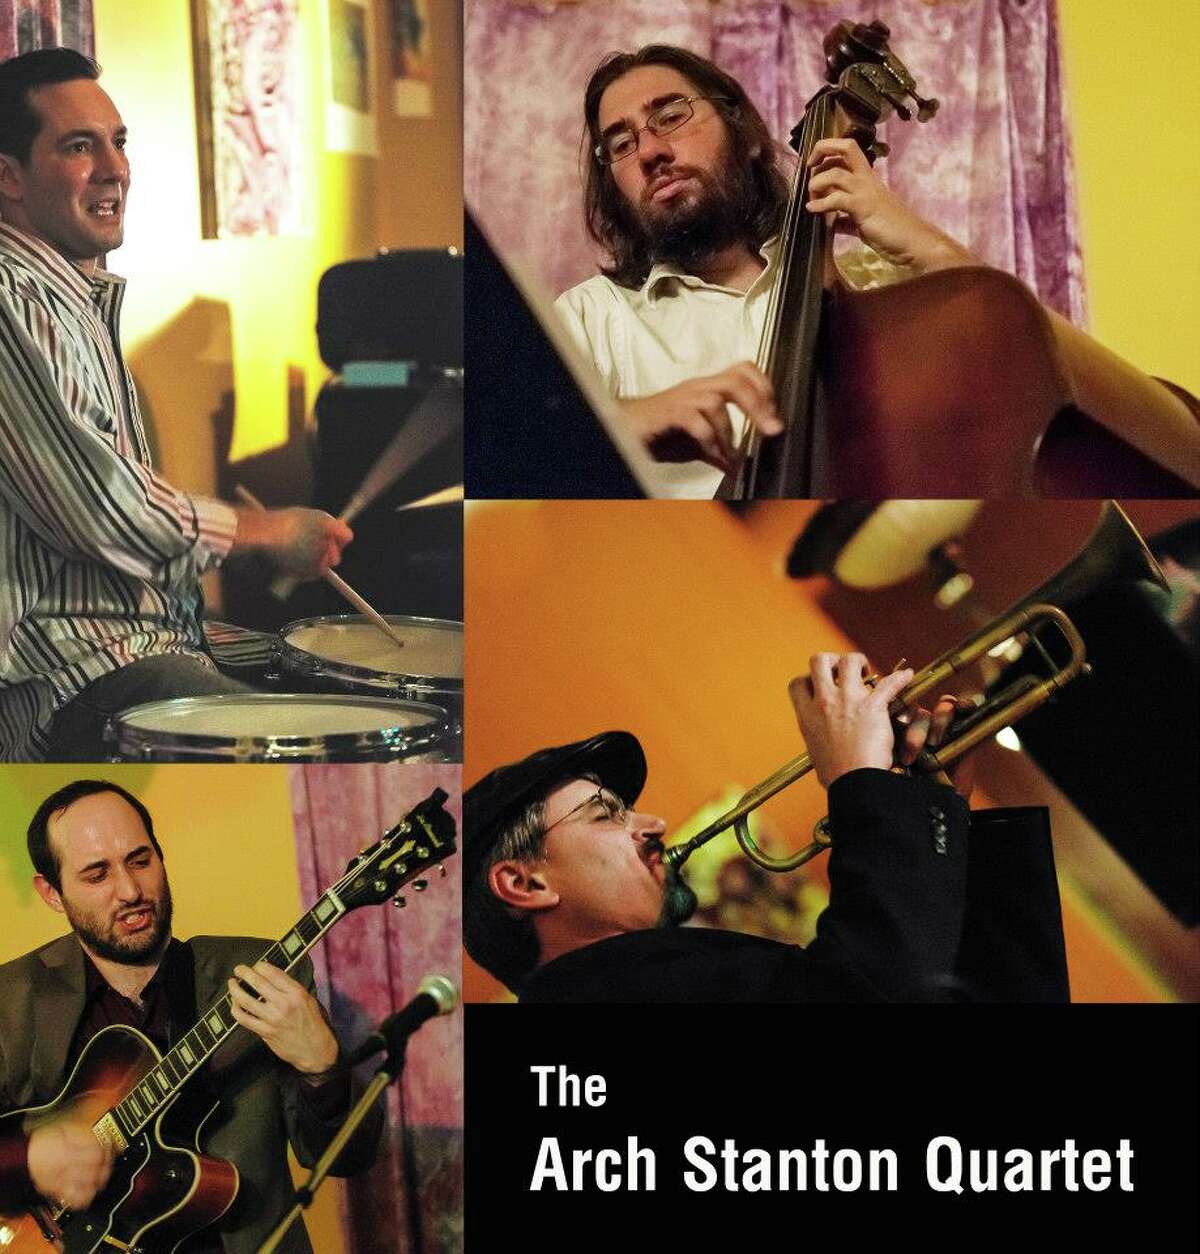 Members of the Arch Stanton Quartet (courtesy of the group)